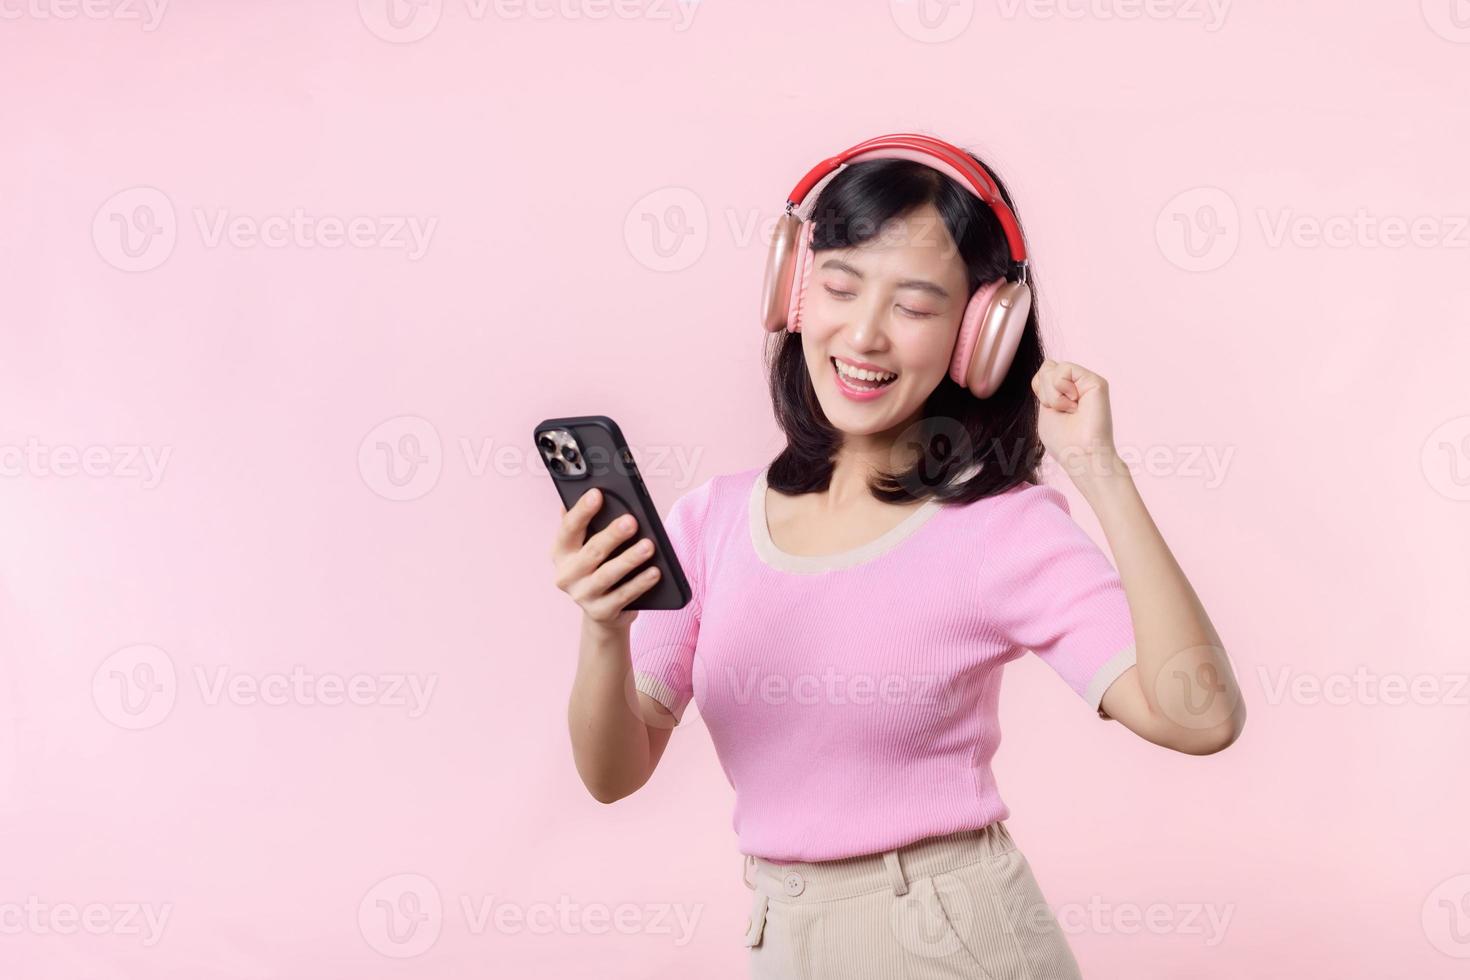 Portrait cheerful young asian woman enjoy listening audio by smartphone music application against pink. Happy smiling female person with headphone. Sound, leisure, lifestyle, technology concept photo